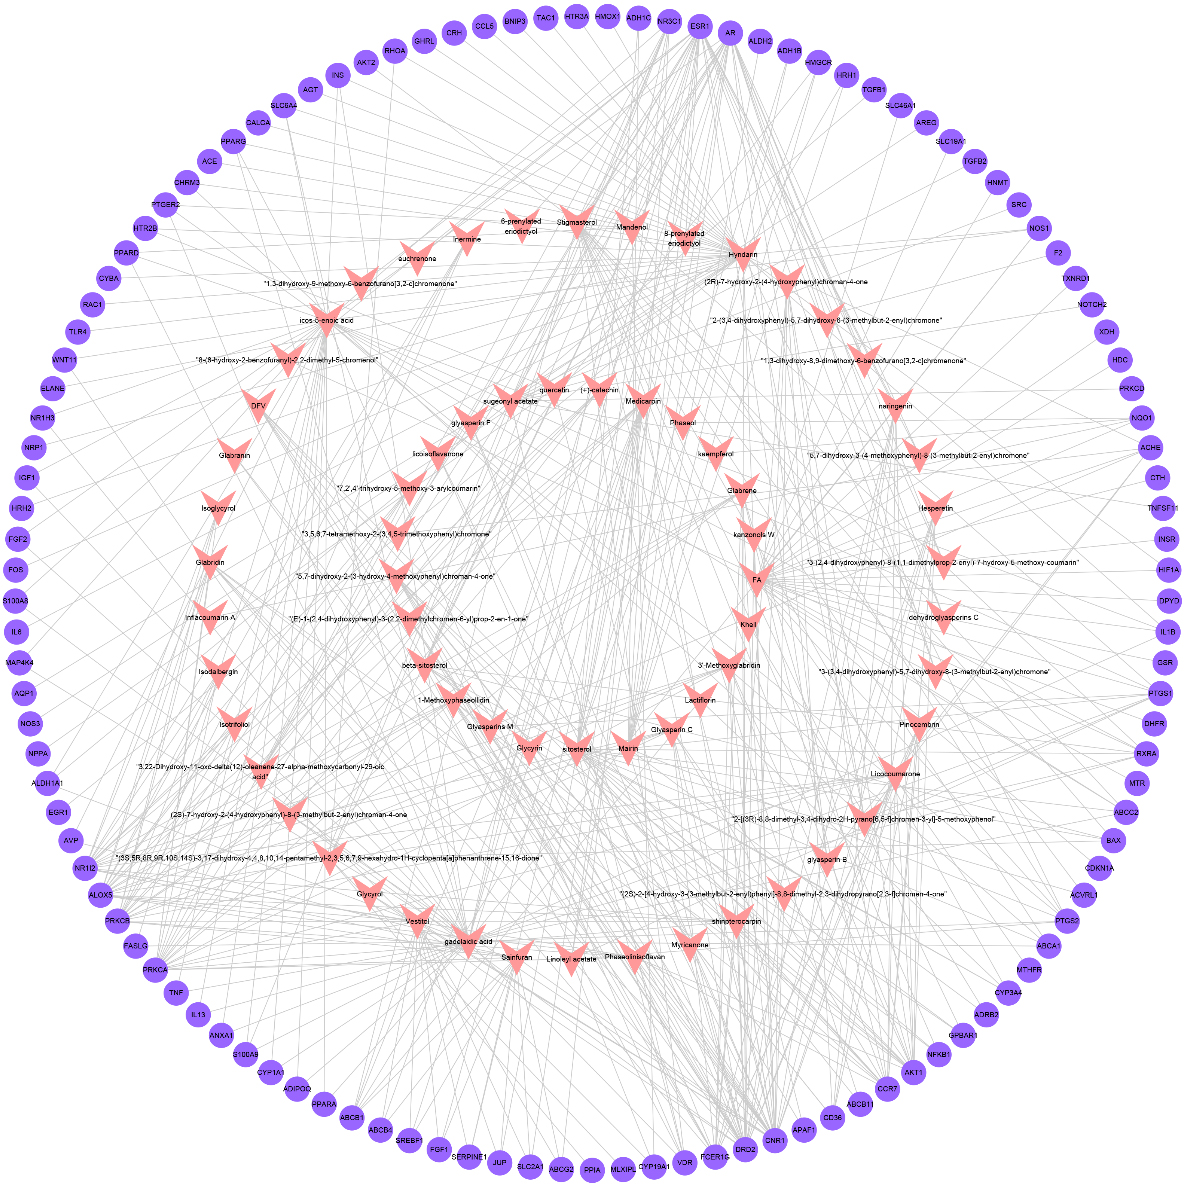 Network of active compounds and CSP-FD targets (pink inverted triangle node denotes the active components of CSP; purple circular nodes denote the CSP-FD targets).